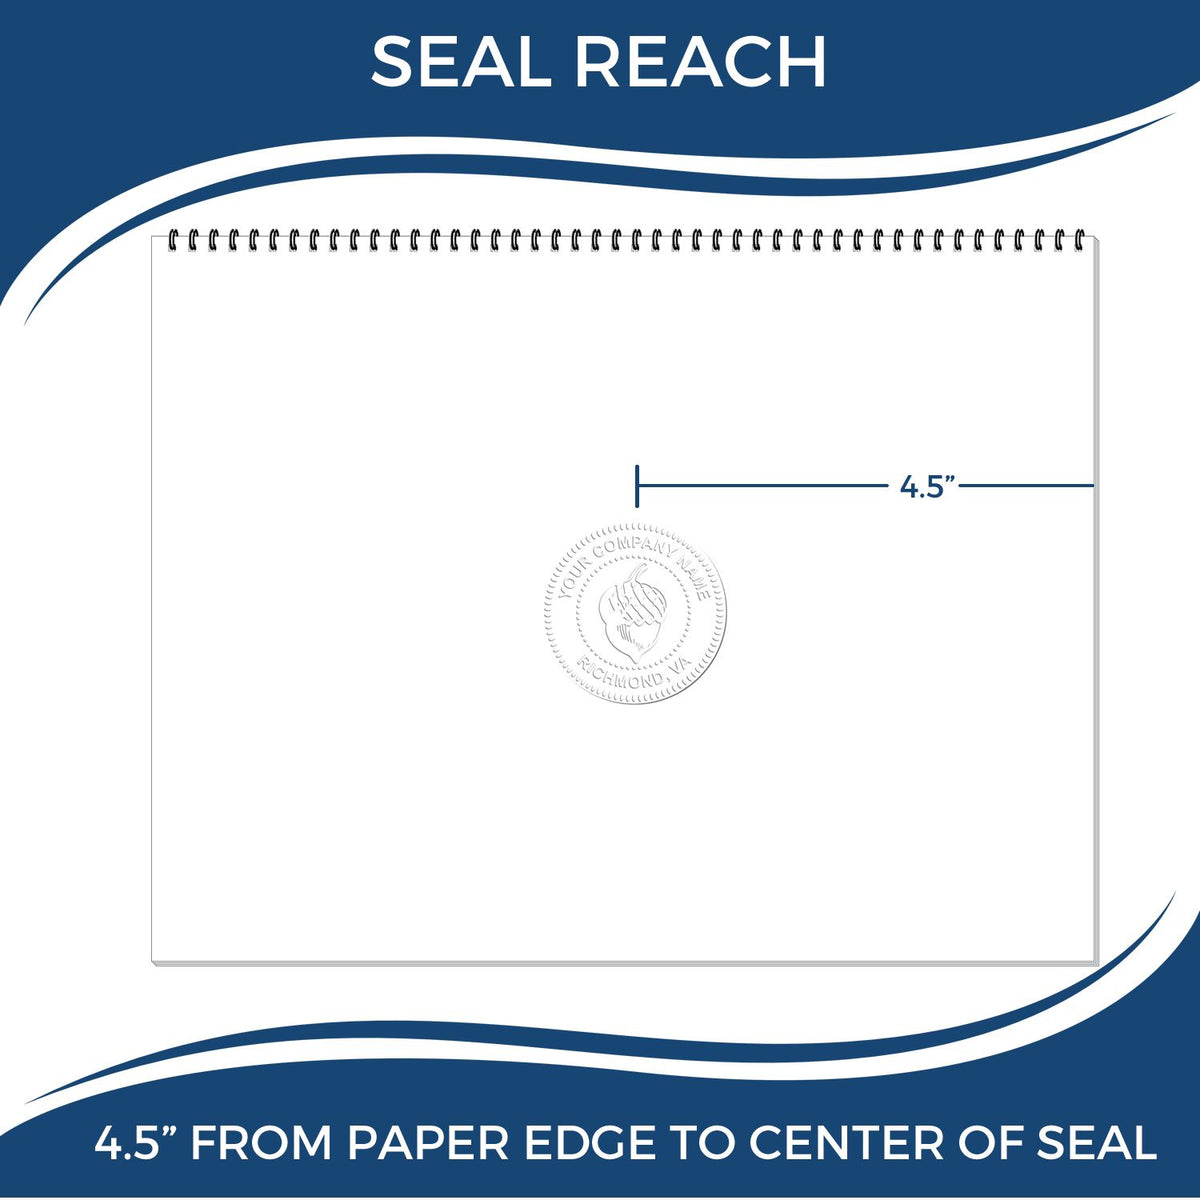 An infographic showing the seal reach which is represented by a ruler and a miniature seal image of the Extended Long Reach Washington Architect Seal Embosser